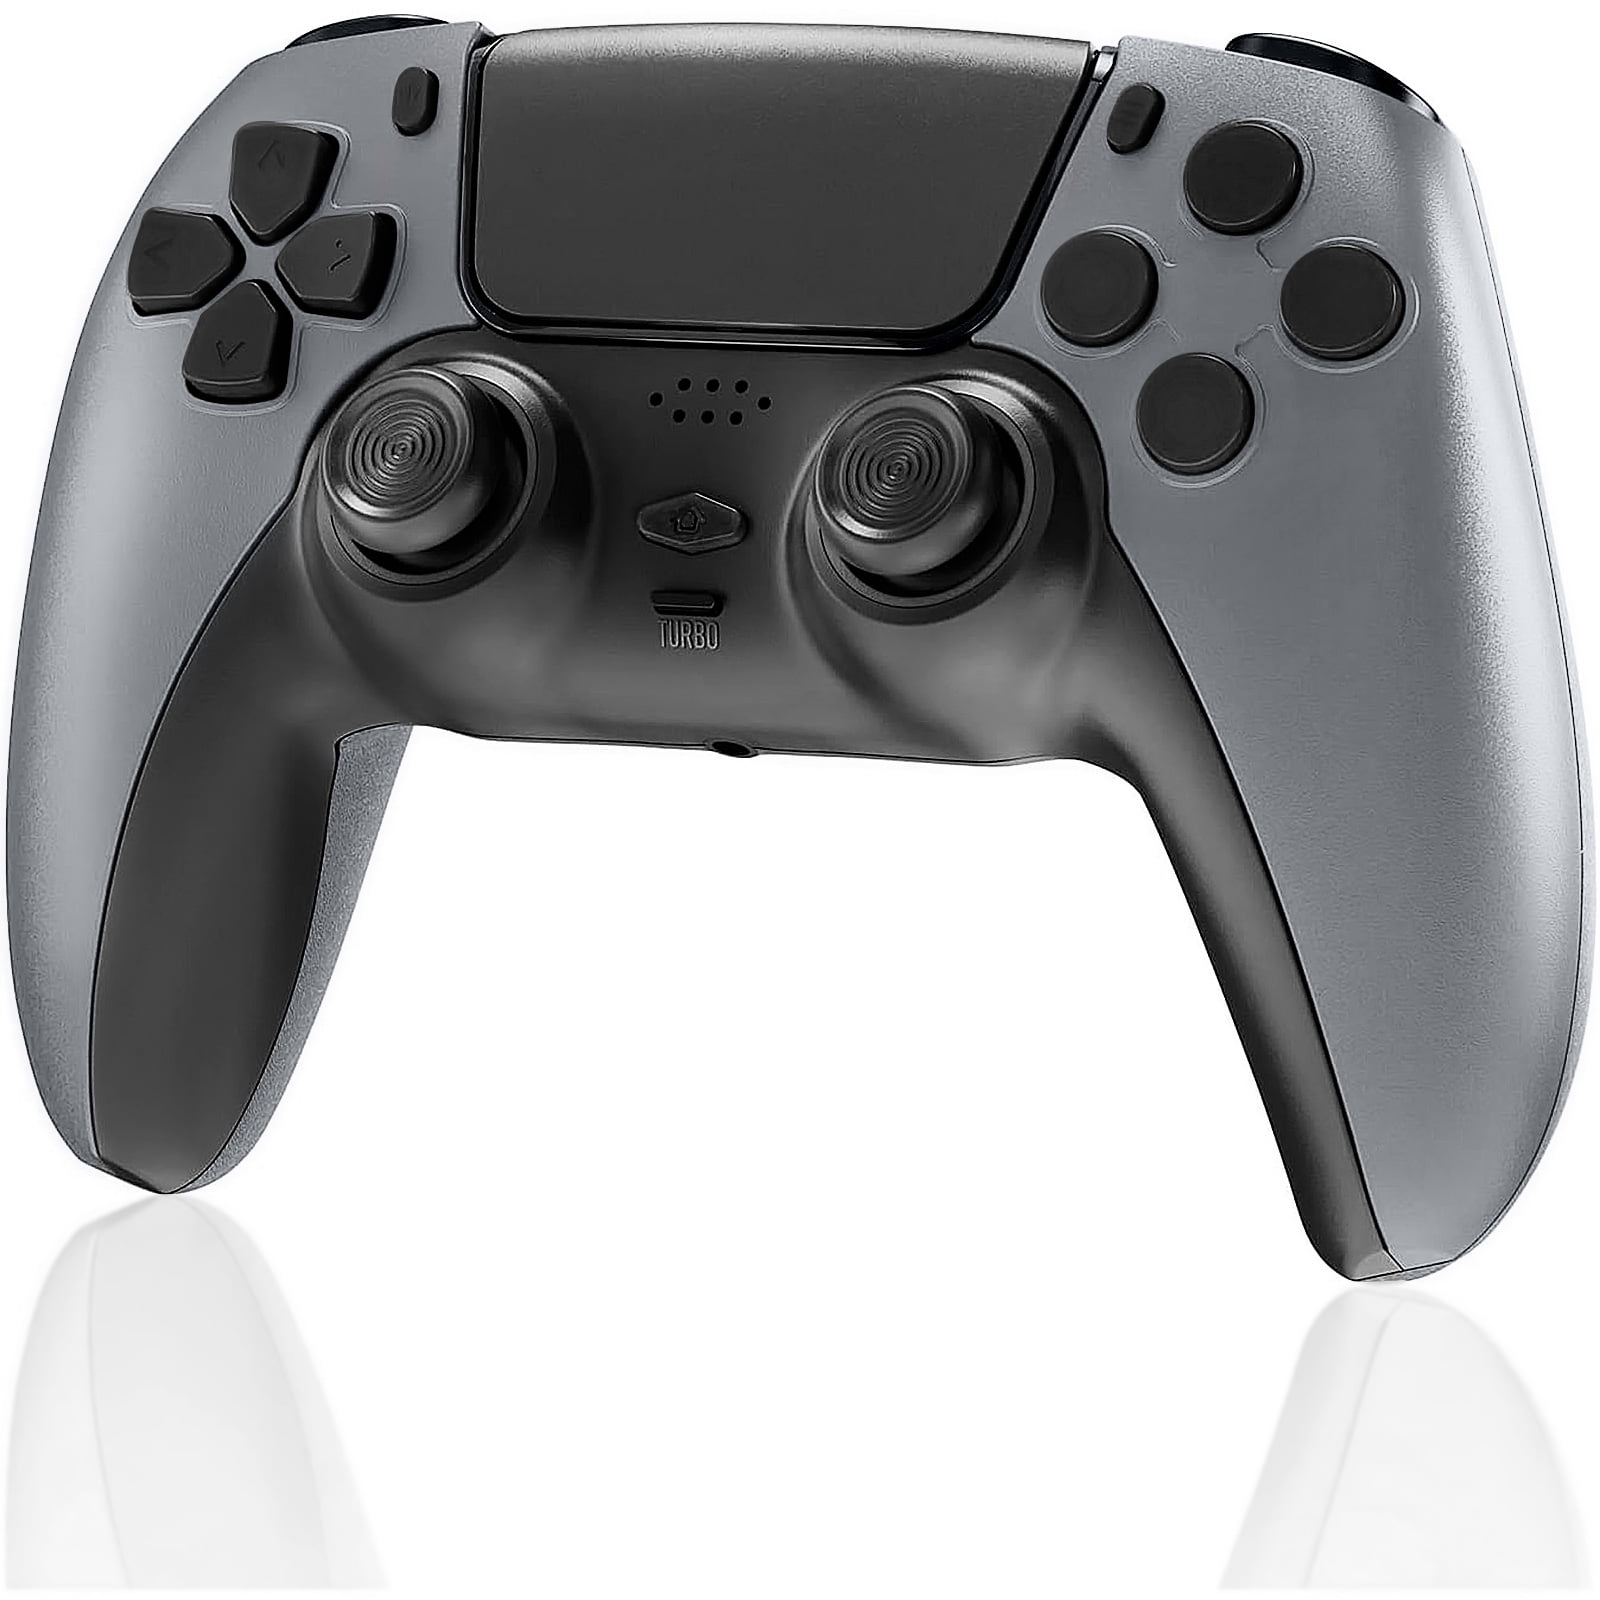 Wireless Game Compatible with PS4/PS4 Pro/PS4 Slim Steel Grey - Walmart.com